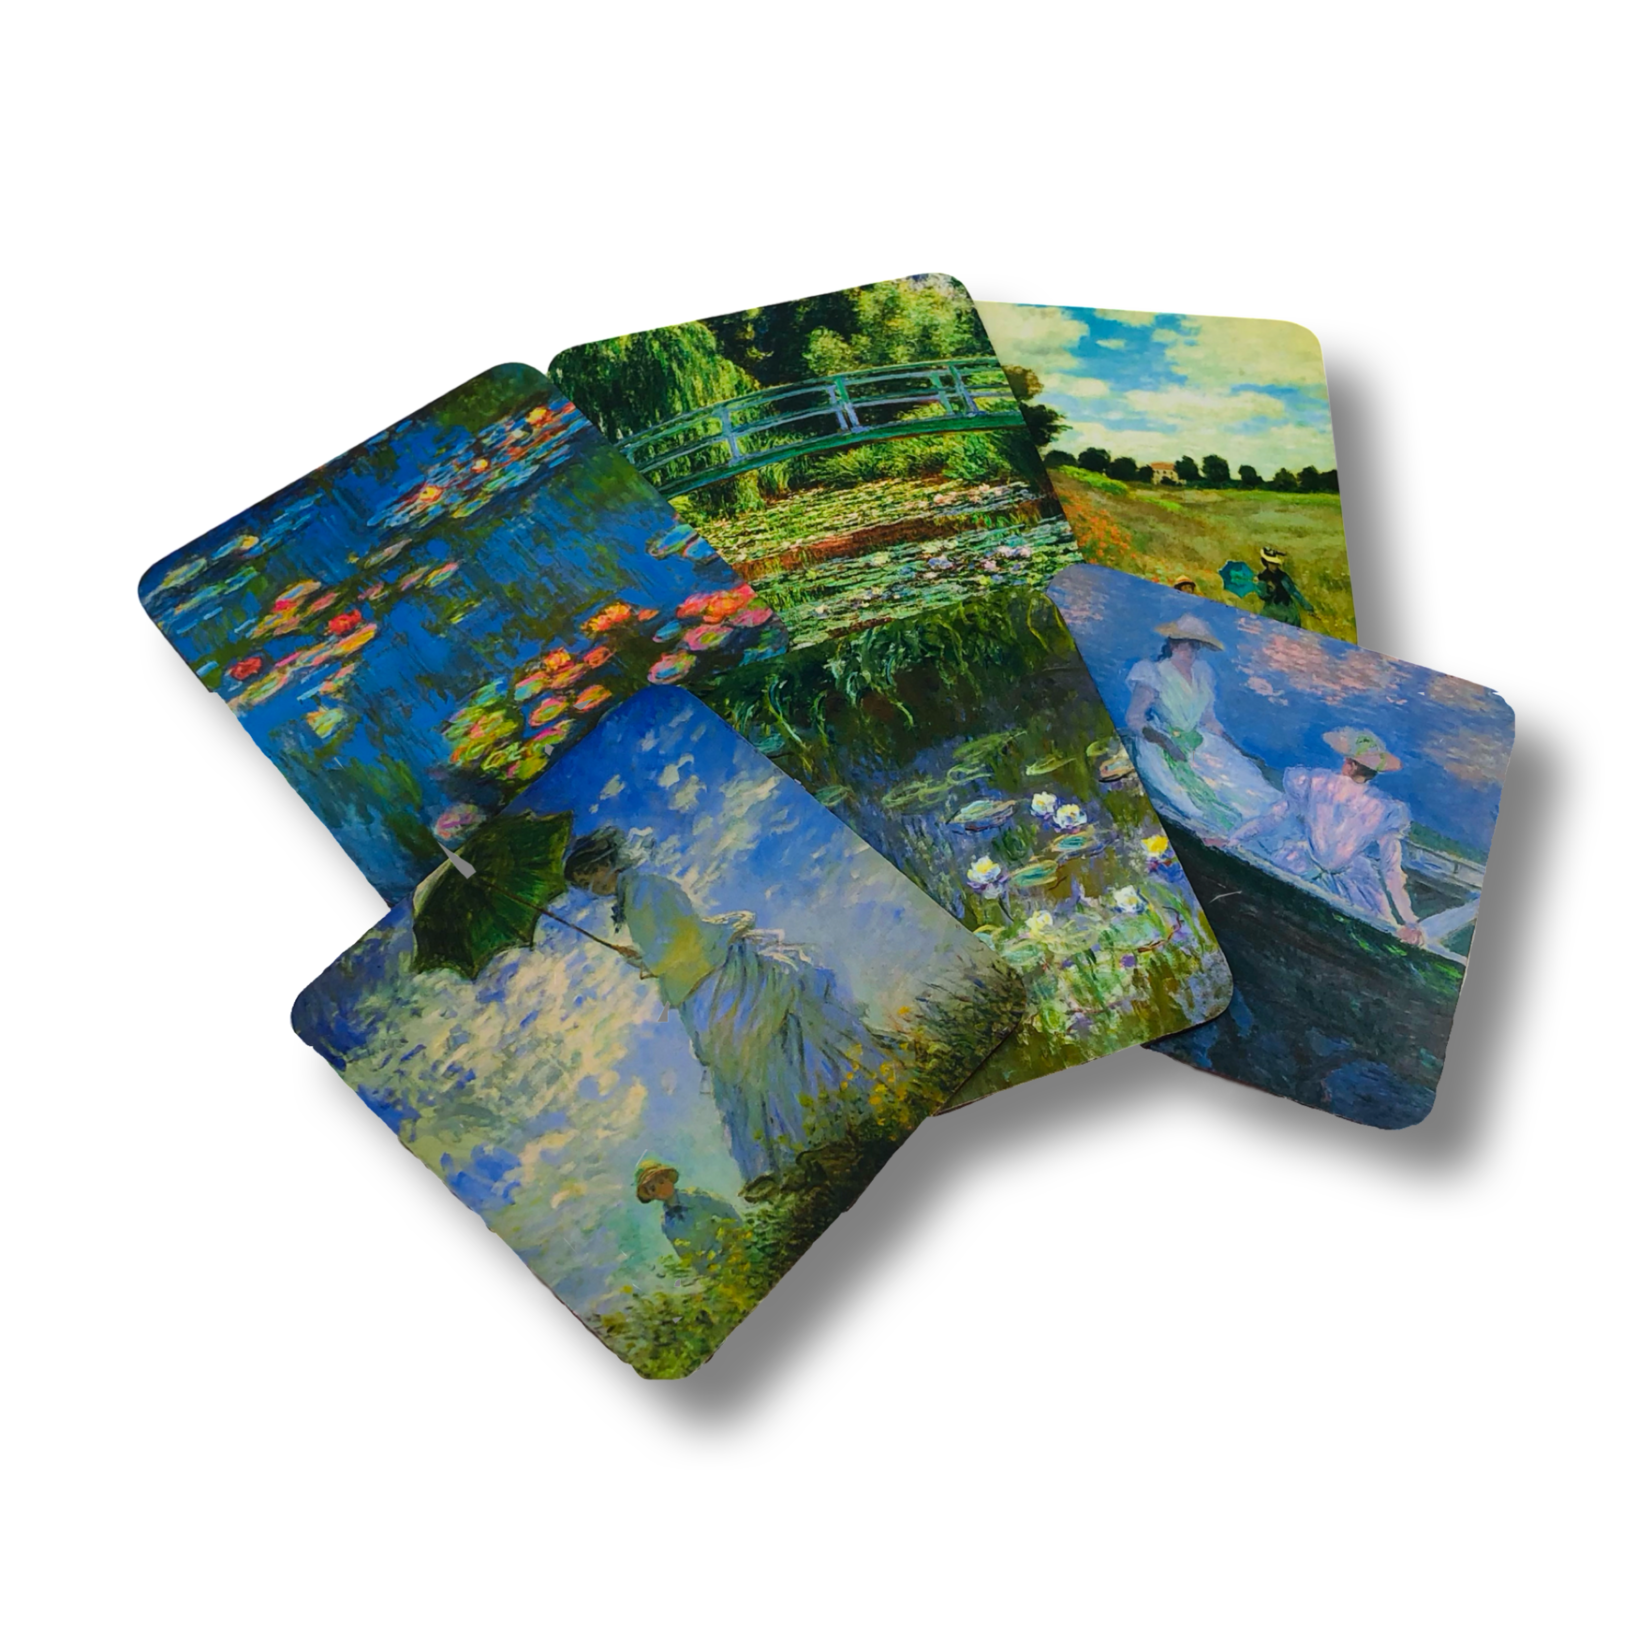 KISS THAT FROG MONET S6 COASTER EDITION